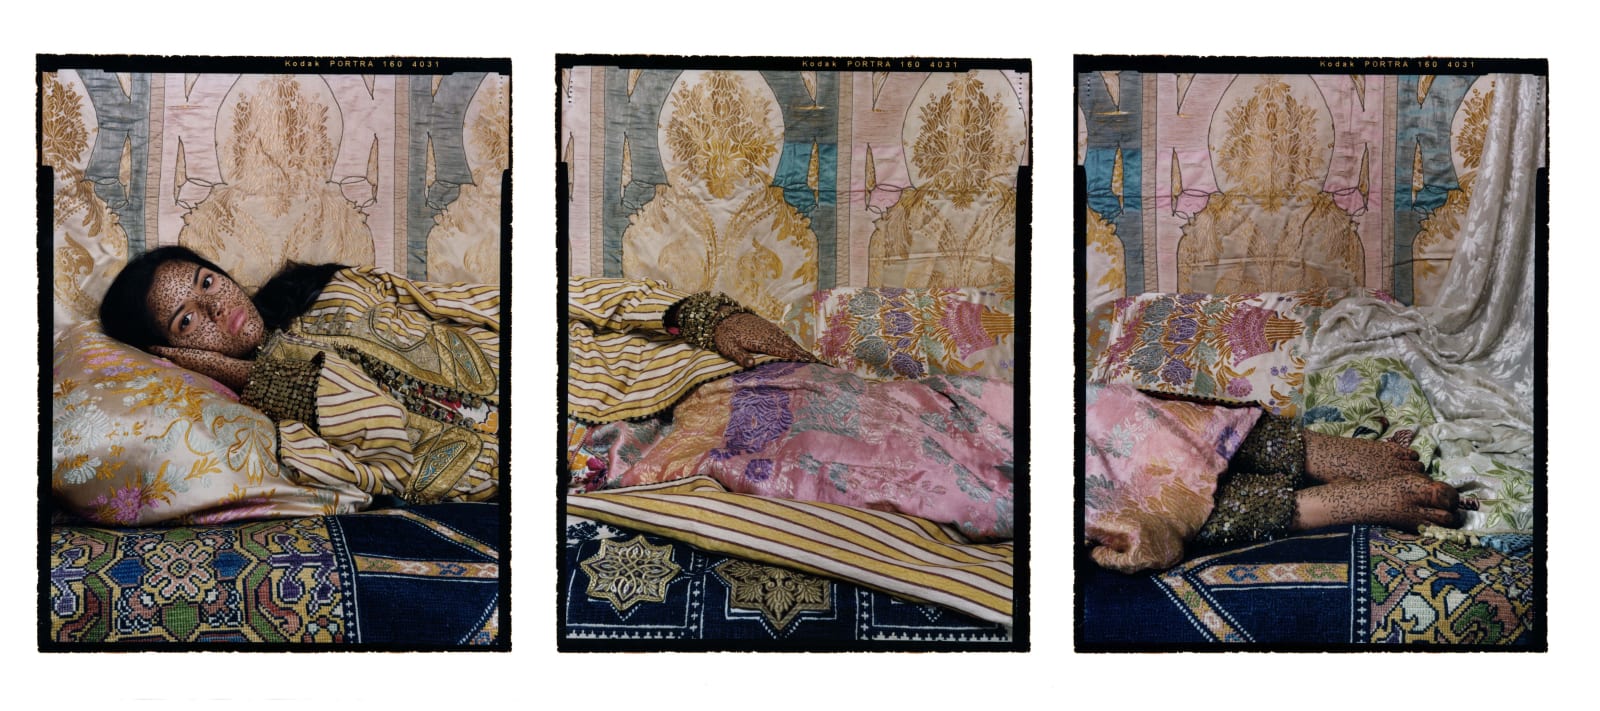 Triptych of woman reclining in colorful silk robes, by Lalla Essaydi